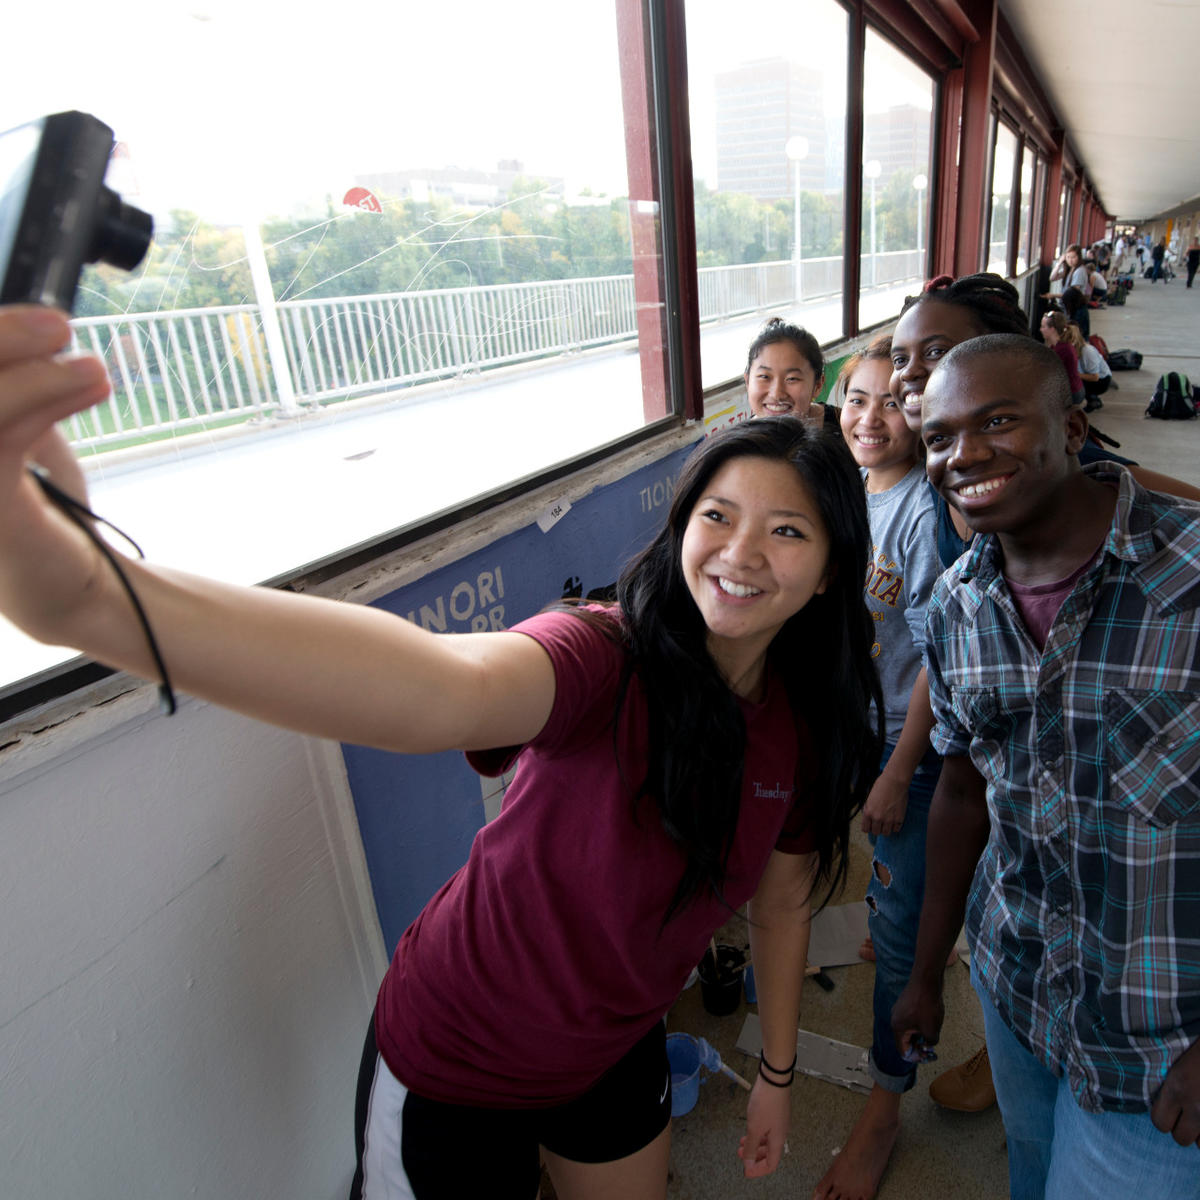 Students take a selfie while painting the bridge